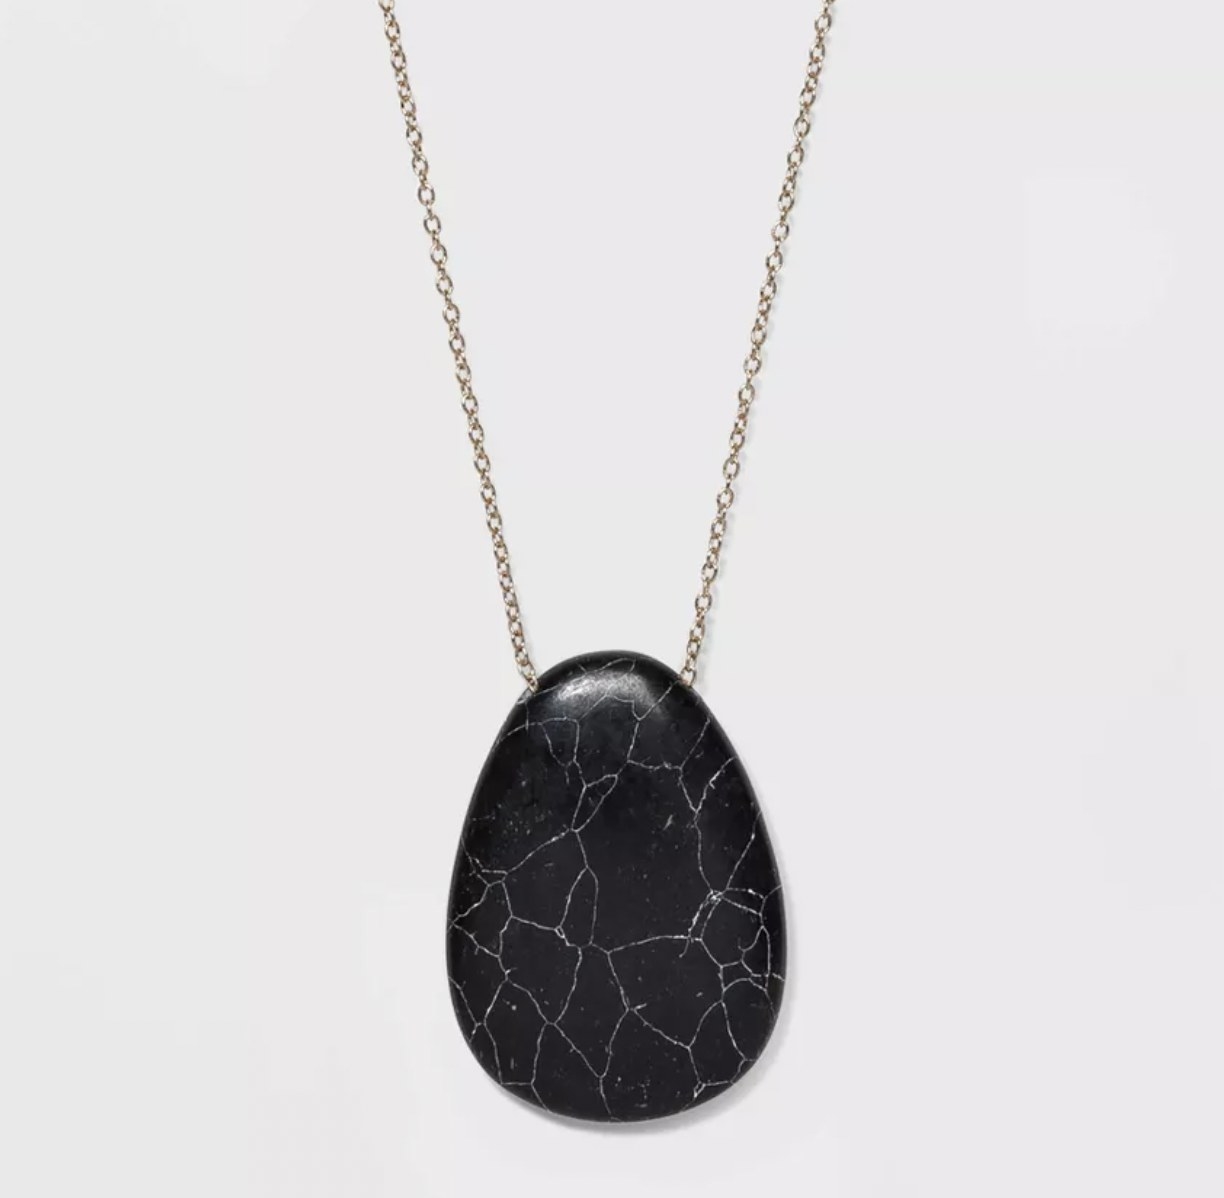 the black howlite pendant on a metal chain